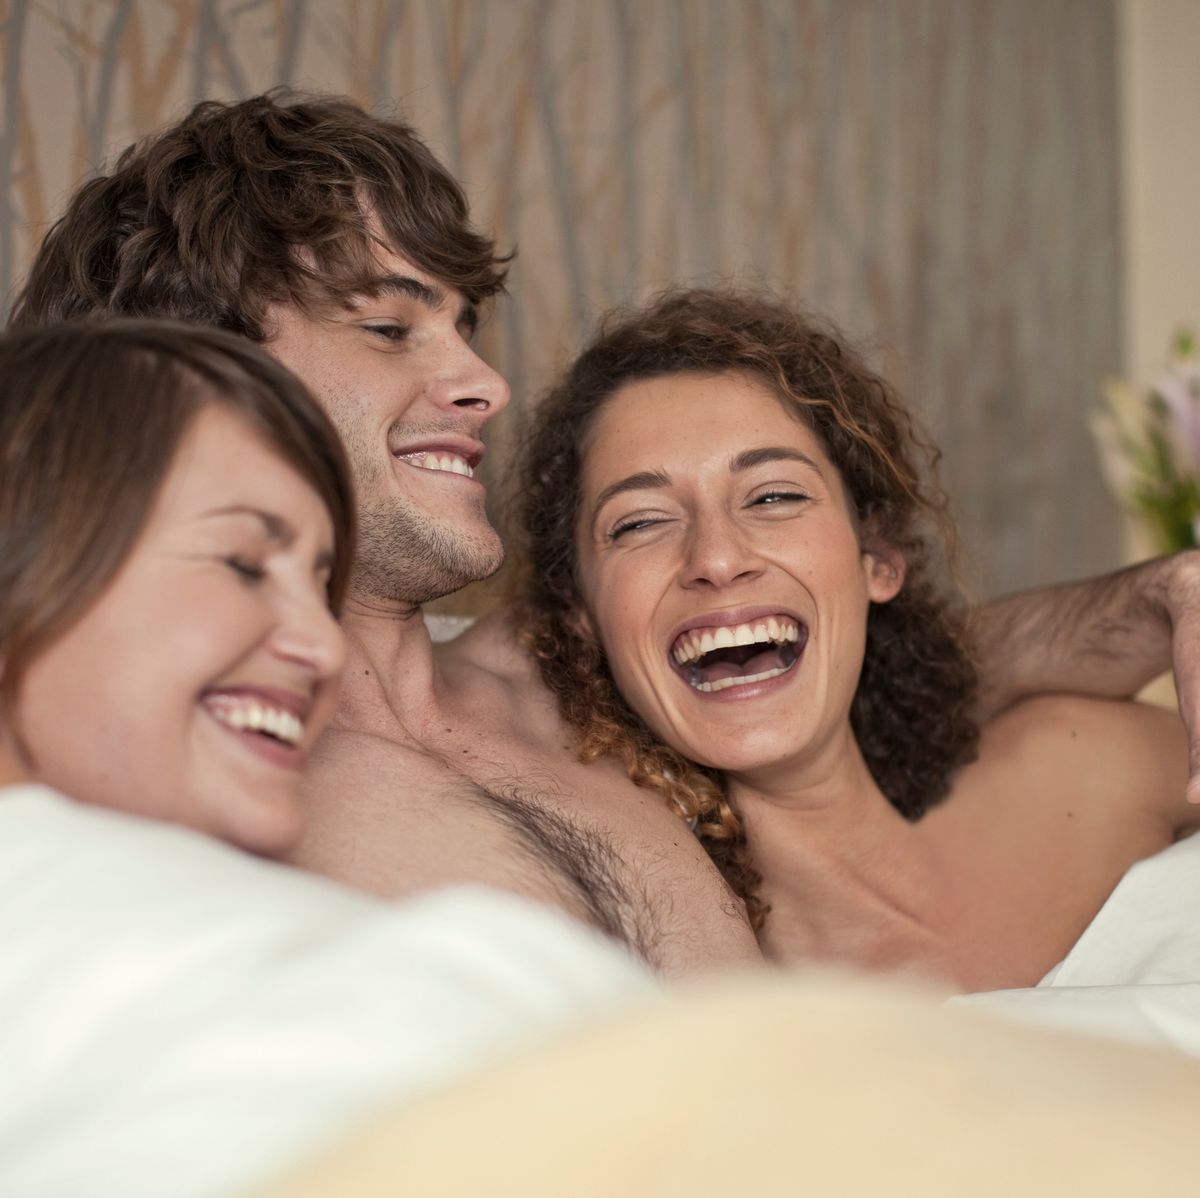 Bed I Know That Girl Threesome - 10 Threesome Sex Positions That Are Super Hot and Totally Doable